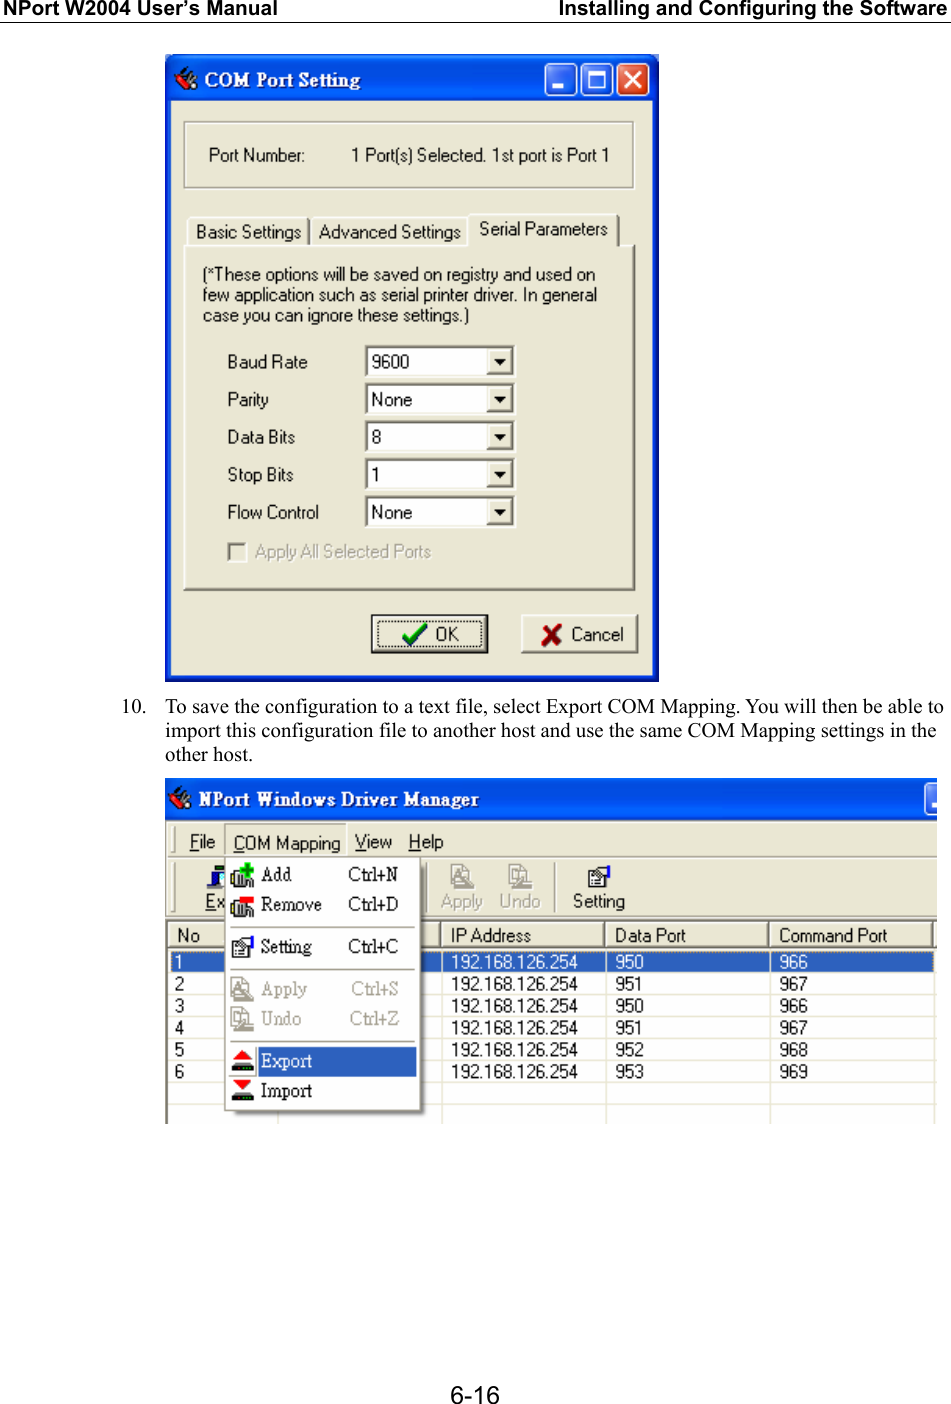 NPort W2004 User’s Manual  Installing and Configuring the Software  6-16 10. To save the configuration to a text file, select Export COM Mapping. You will then be able to import this configuration file to another host and use the same COM Mapping settings in the other host.      